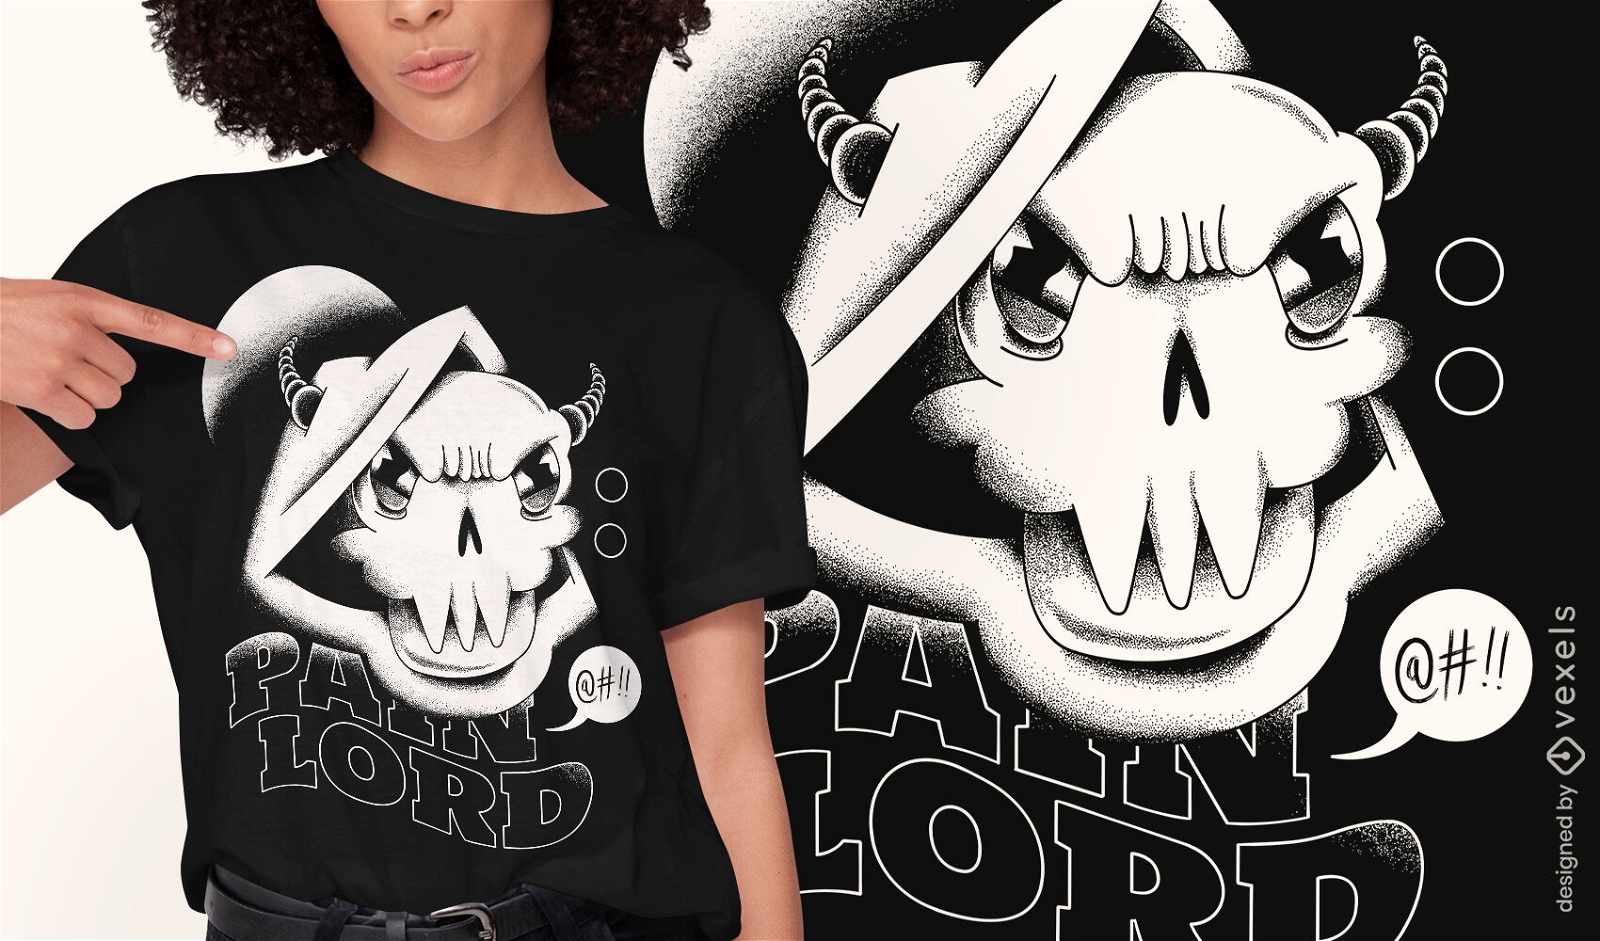 Pain Lord Sch?del Monster T-Shirt Design